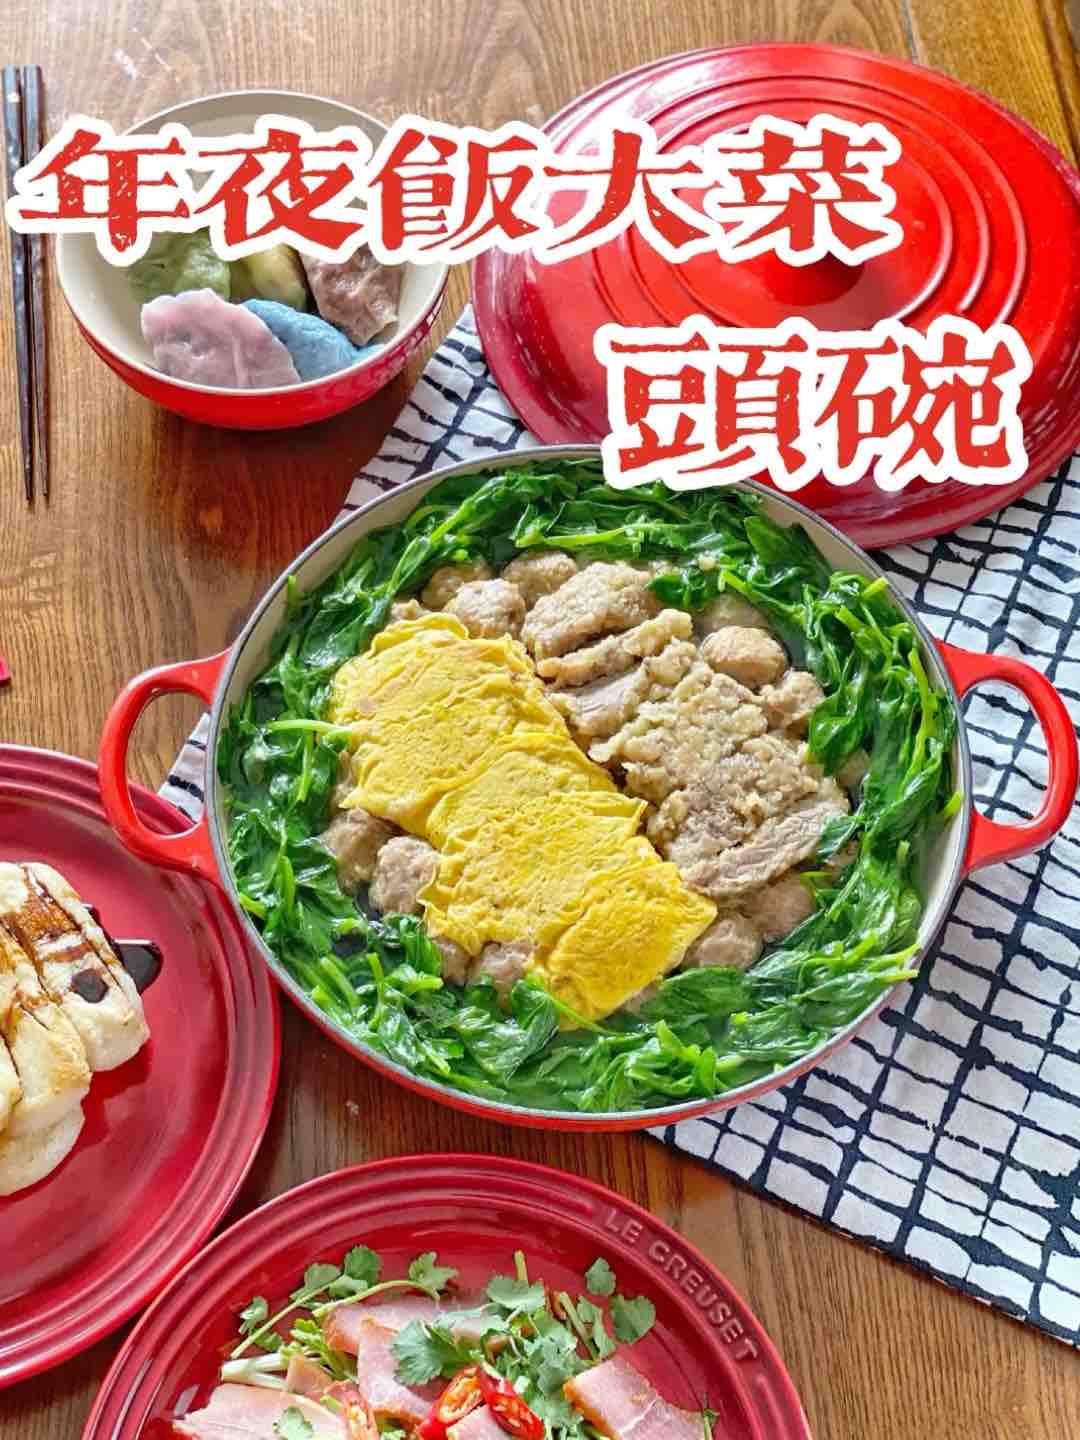 Super Favorite First Bowl, You Can Also Make Big Dishes During Chinese New Year recipe